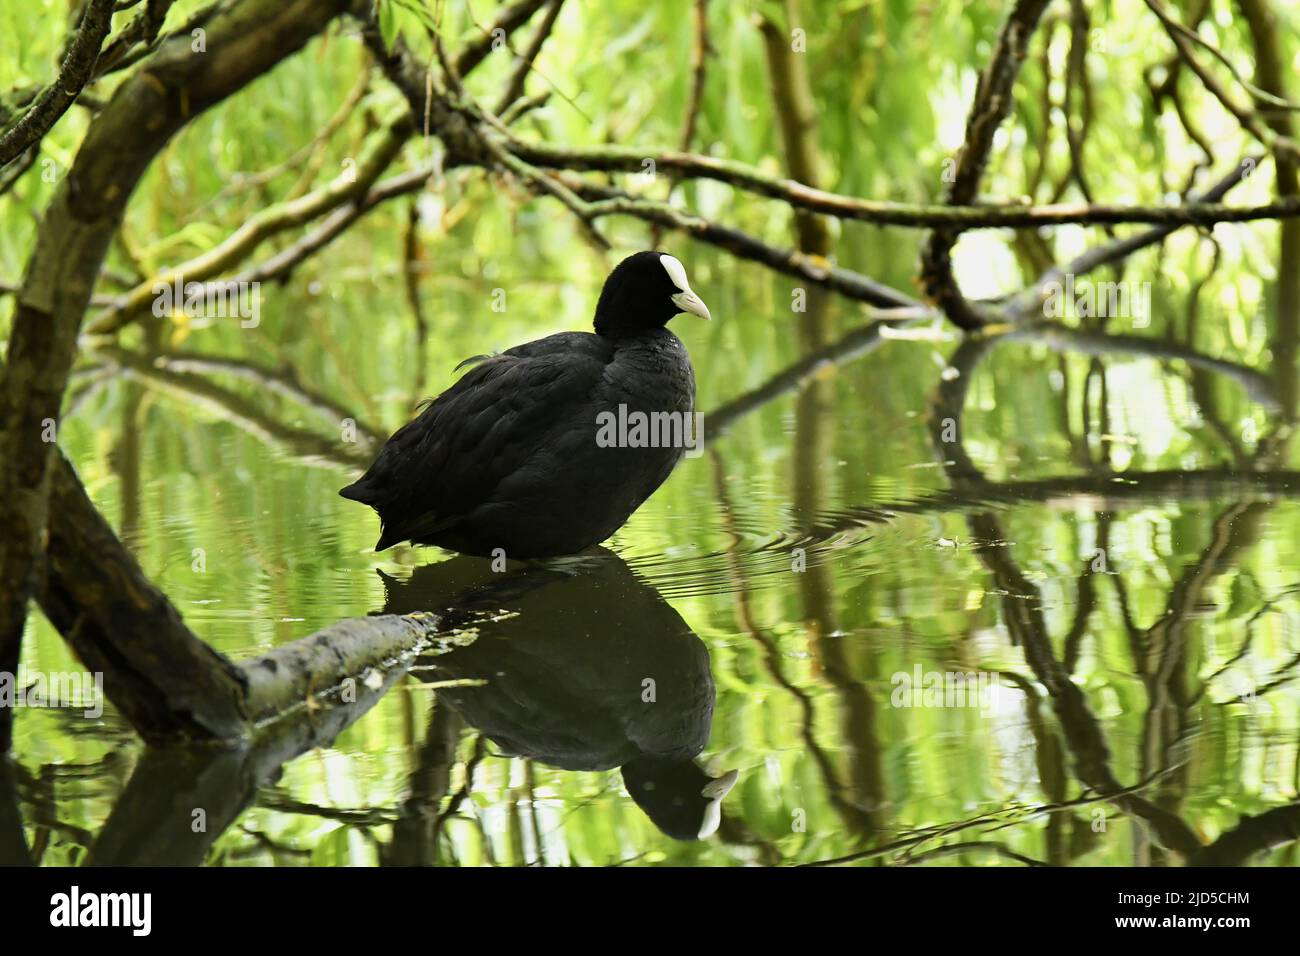 Eurasian coot (Fulica atra) in water under the willow trees, Regent's Park London UK. Stock Photo